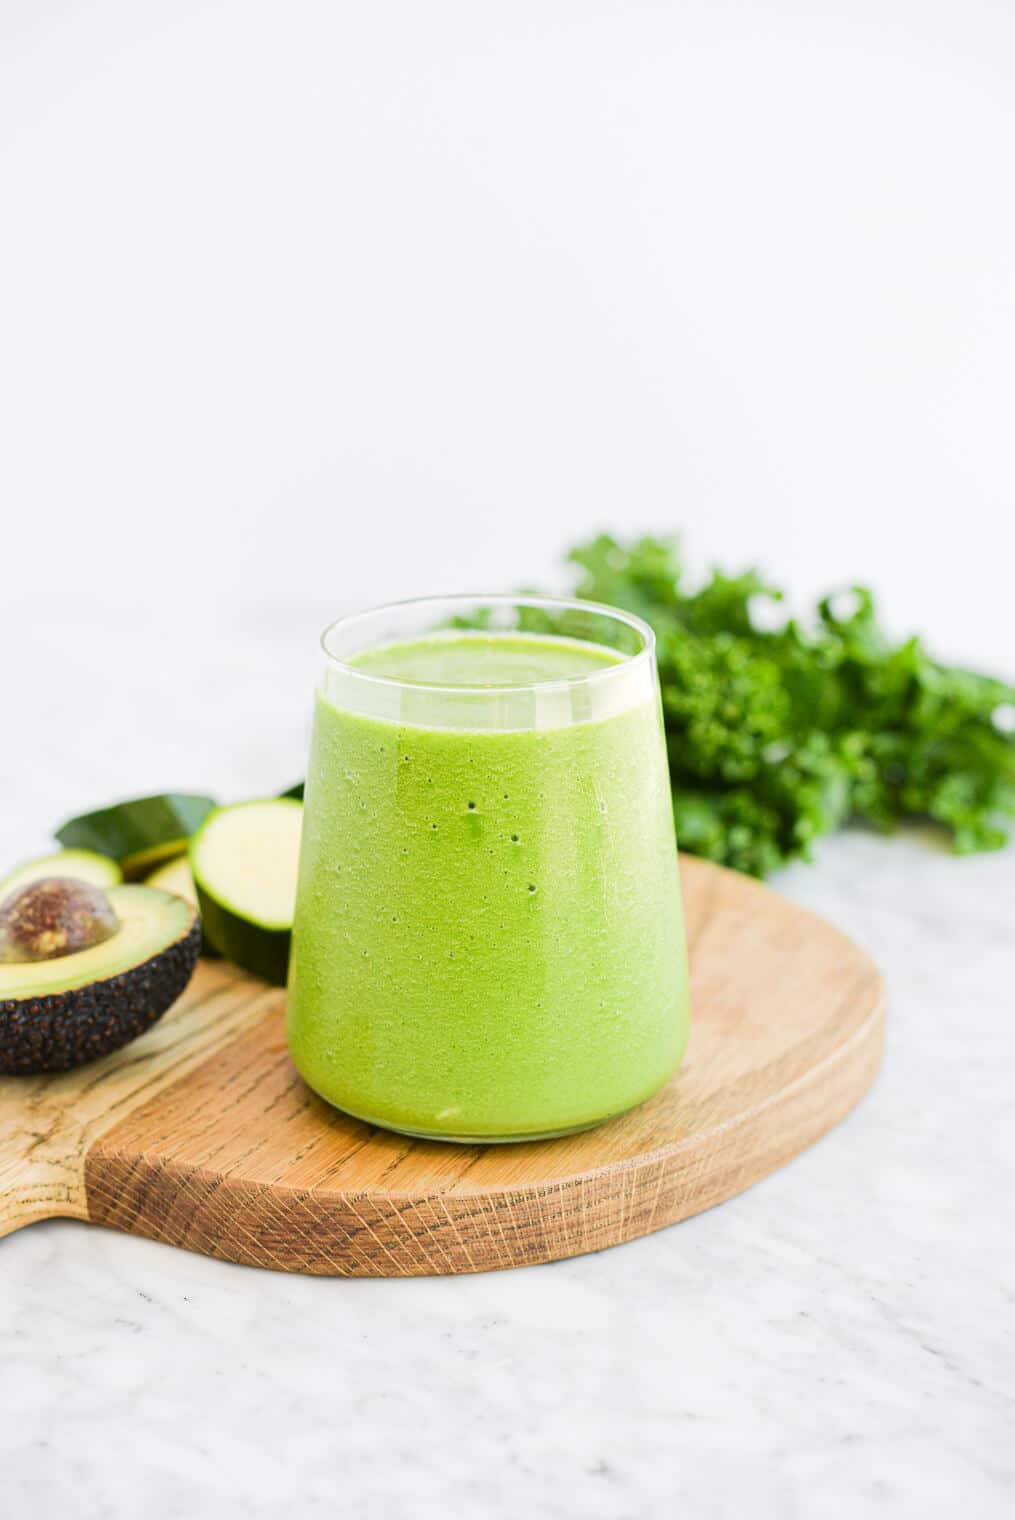 a small clear glass filled to the top with a low carb green smoothie sitting on a wood surface next to an avocado and a bunch of kale